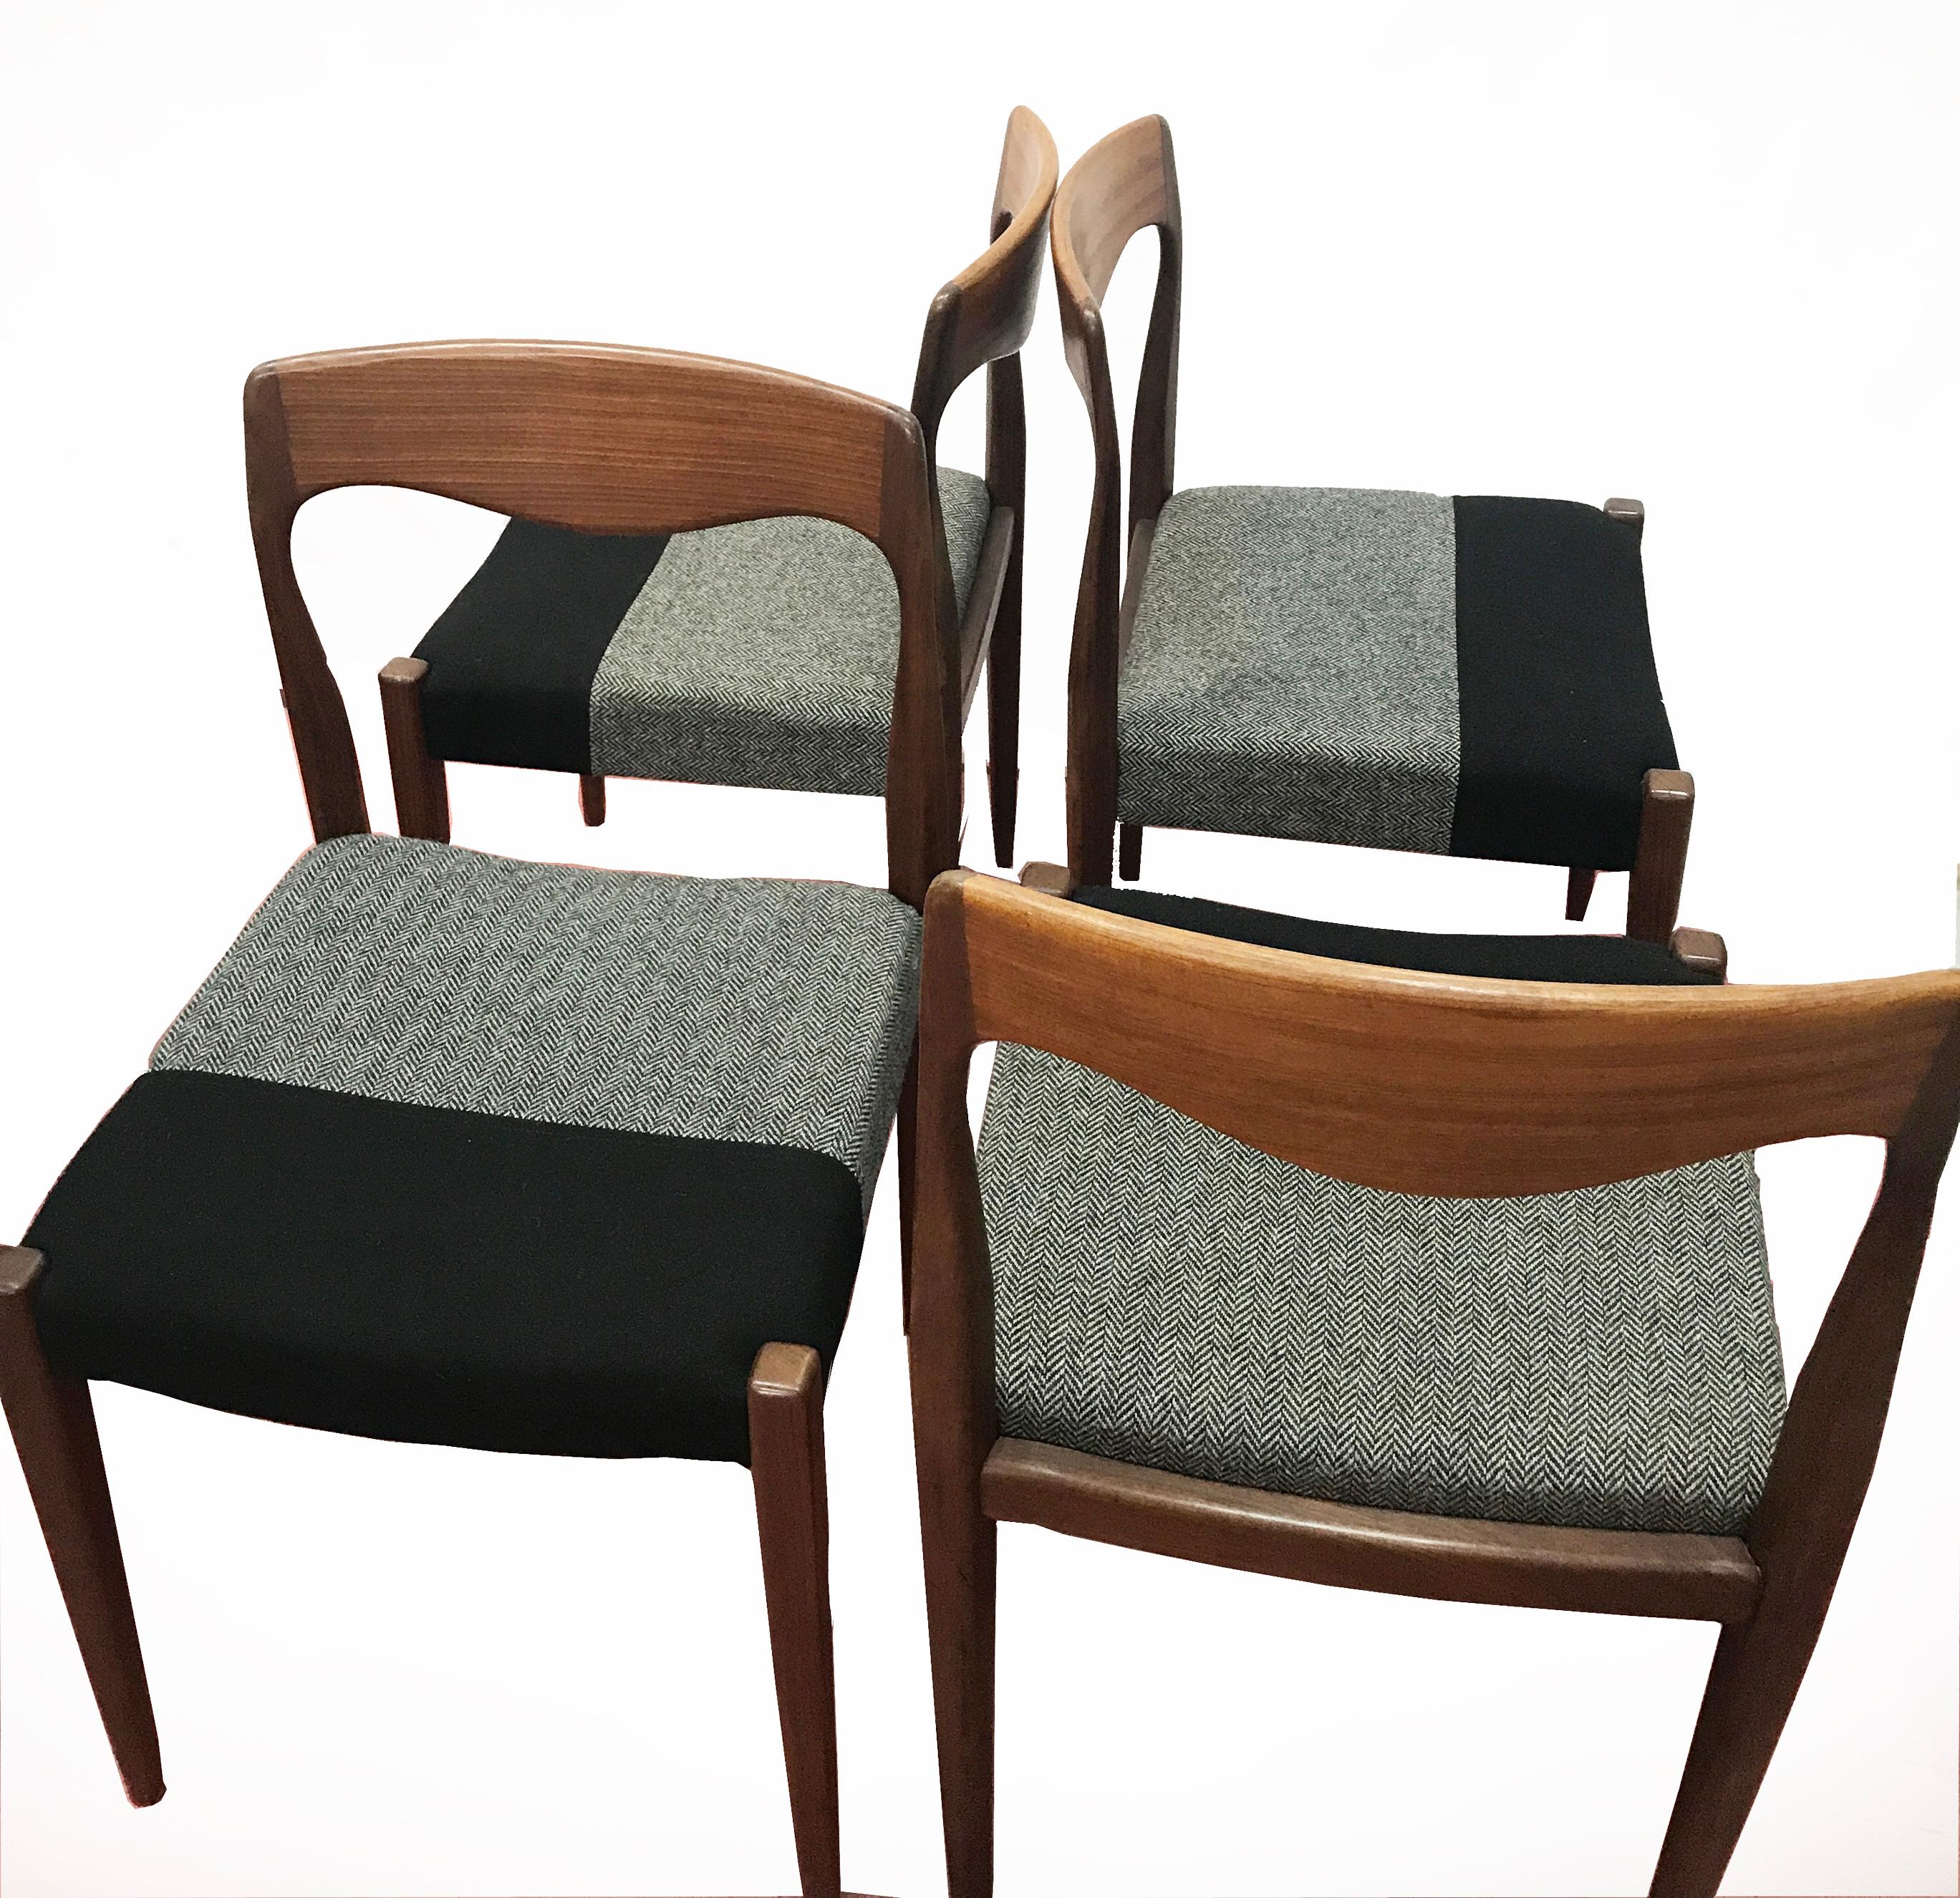 These chairs are of a very good quality, made from tropical wood and birch under the fabric. They have been reupholstered in black wool and black and white sprig pattern wool.